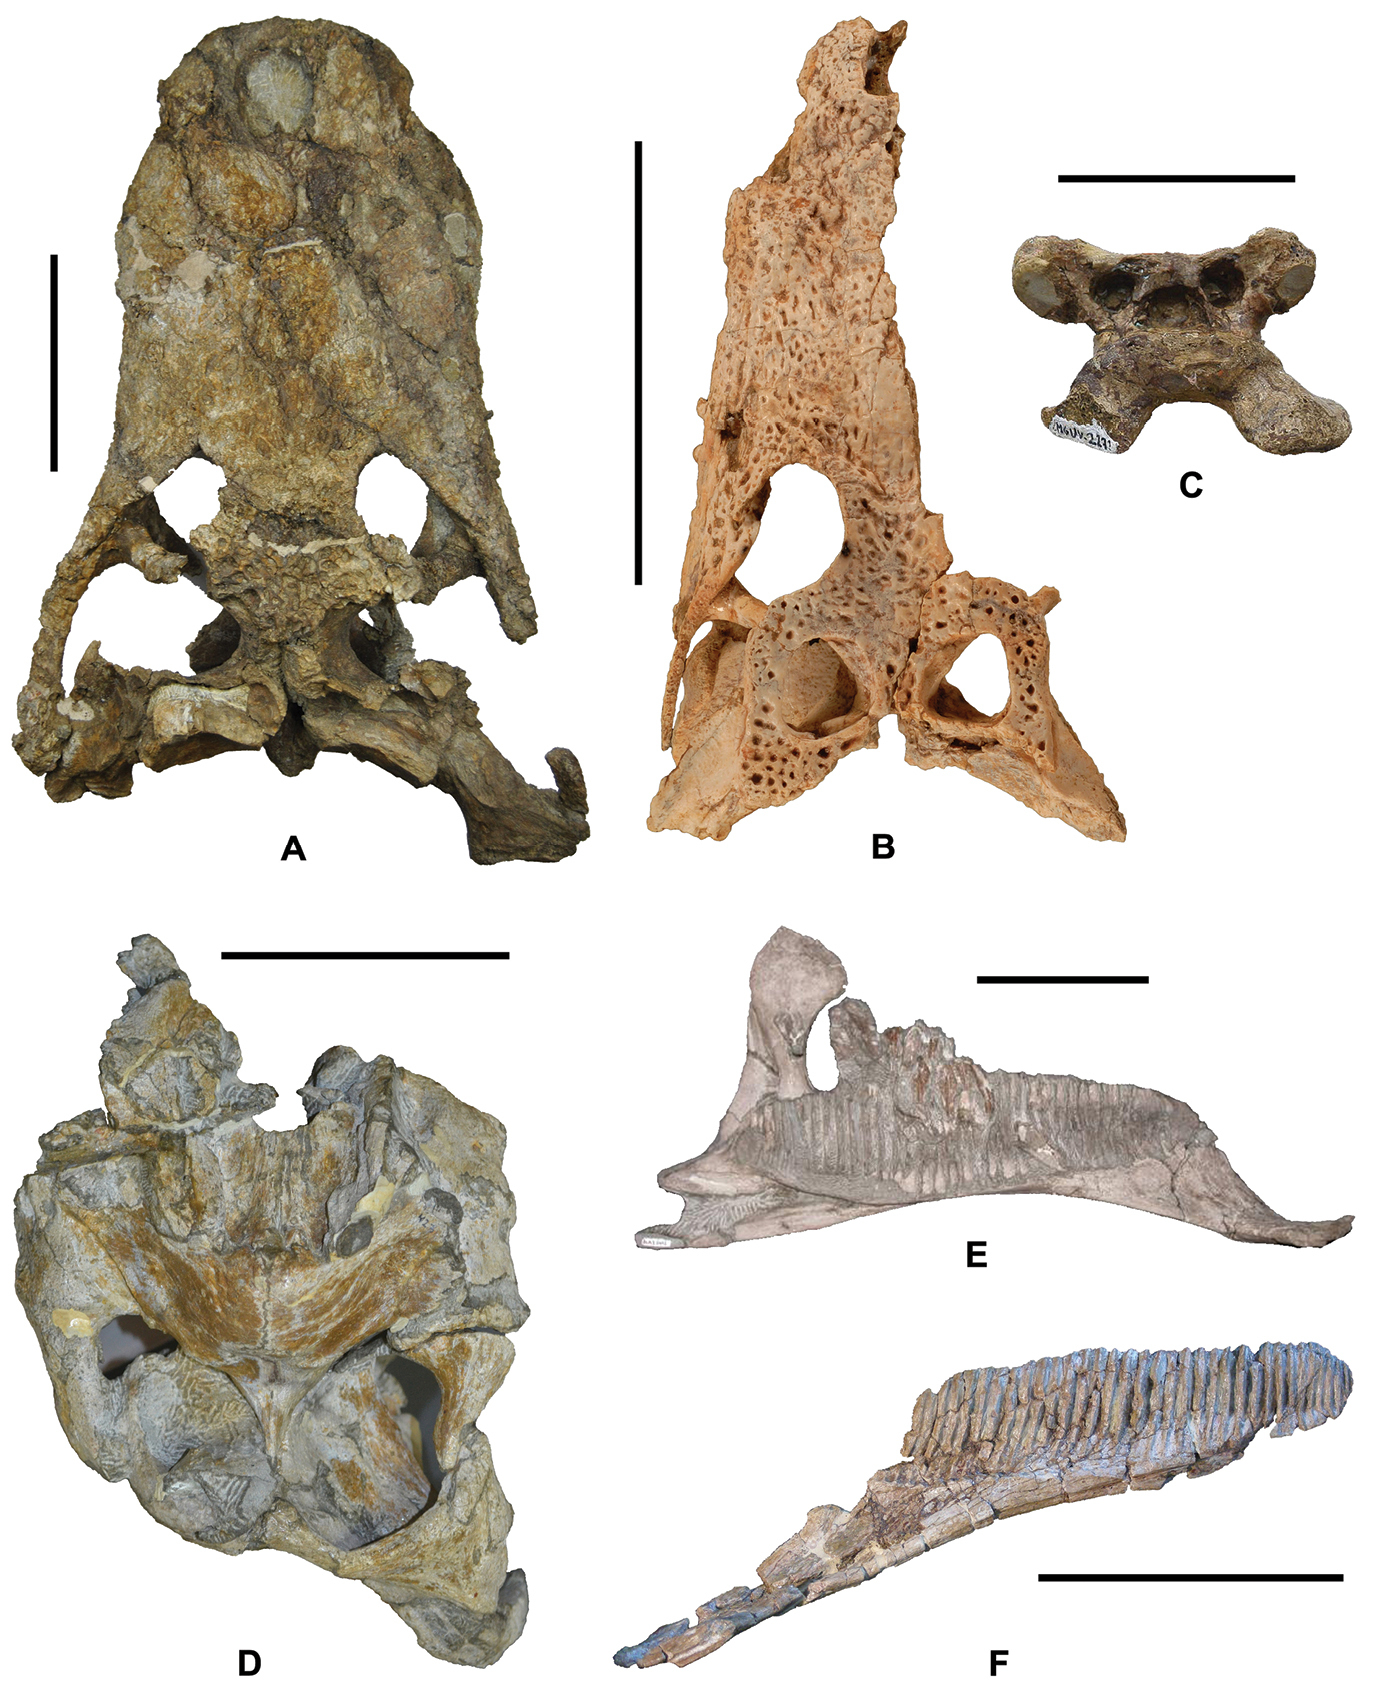 Island life in the Cretaceous - faunal composition, biogeography 